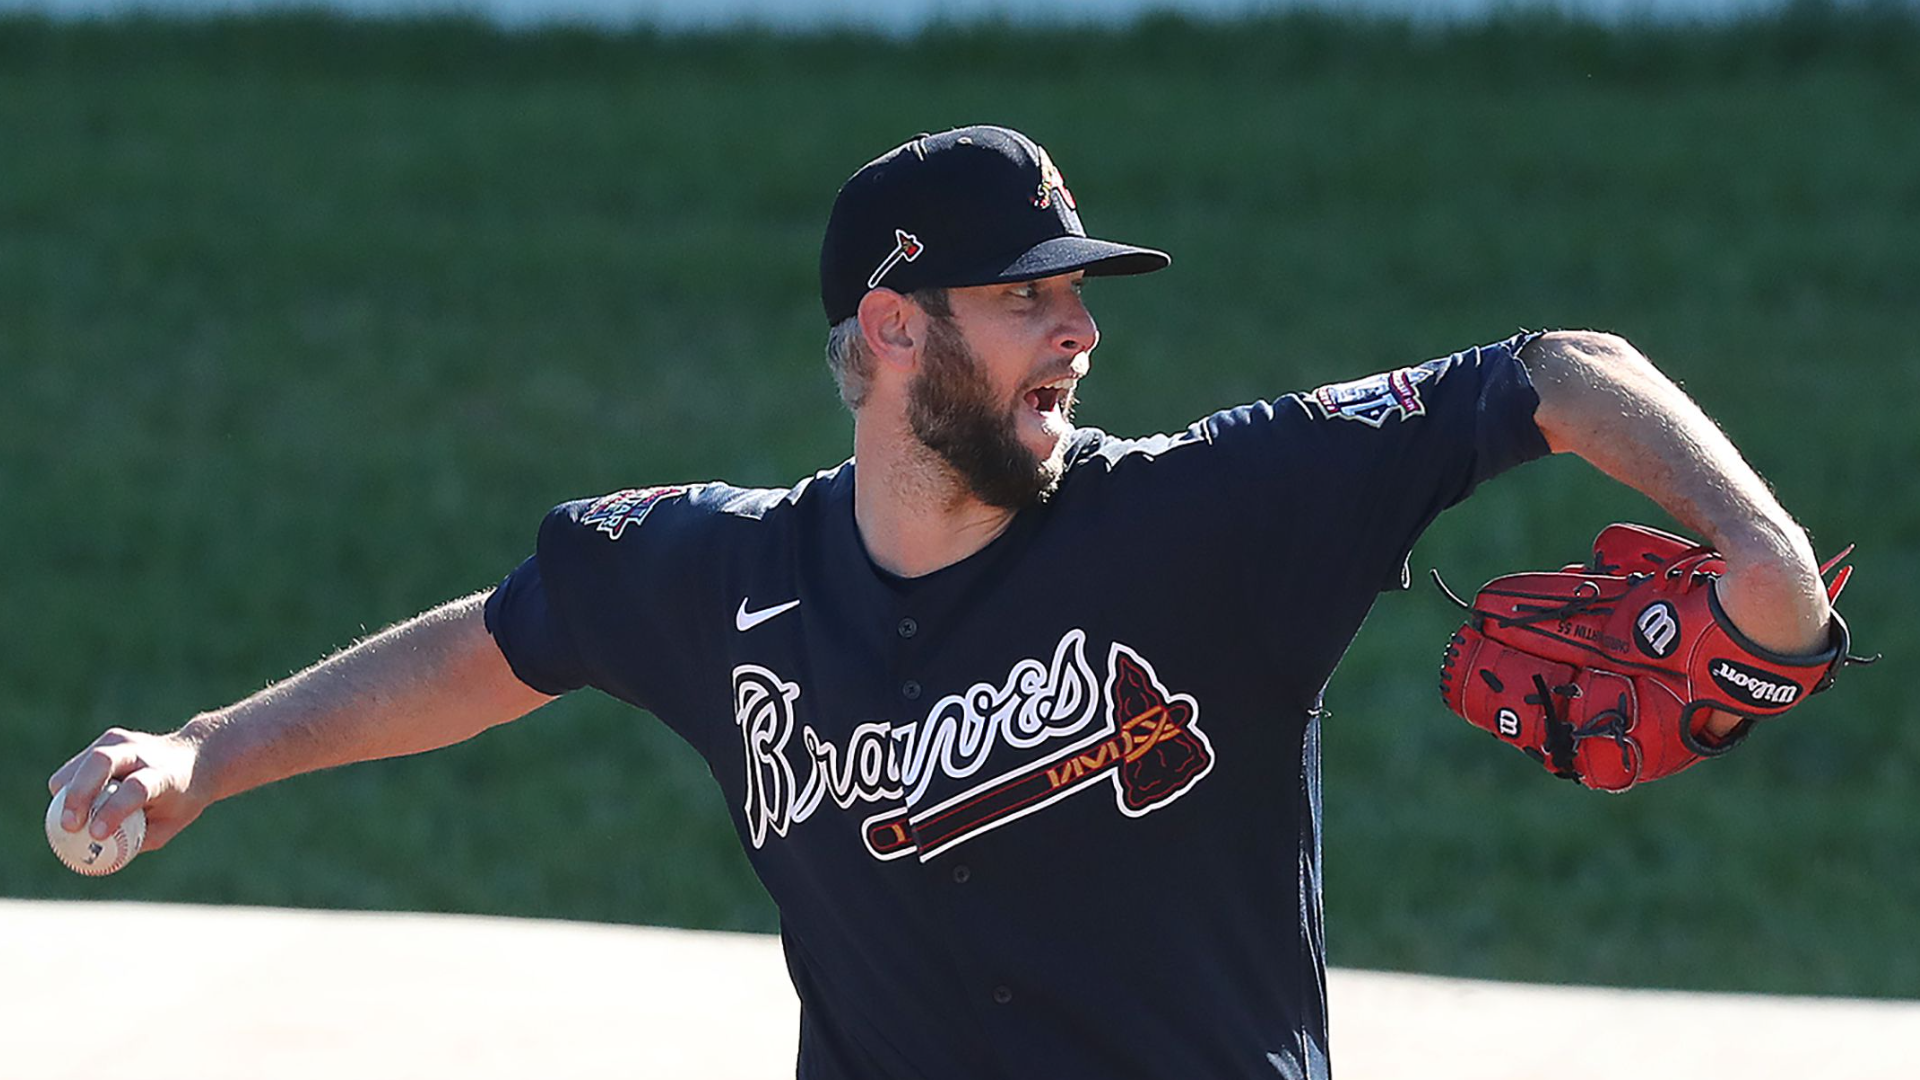 Braves: Evaluating another successful Stripers season